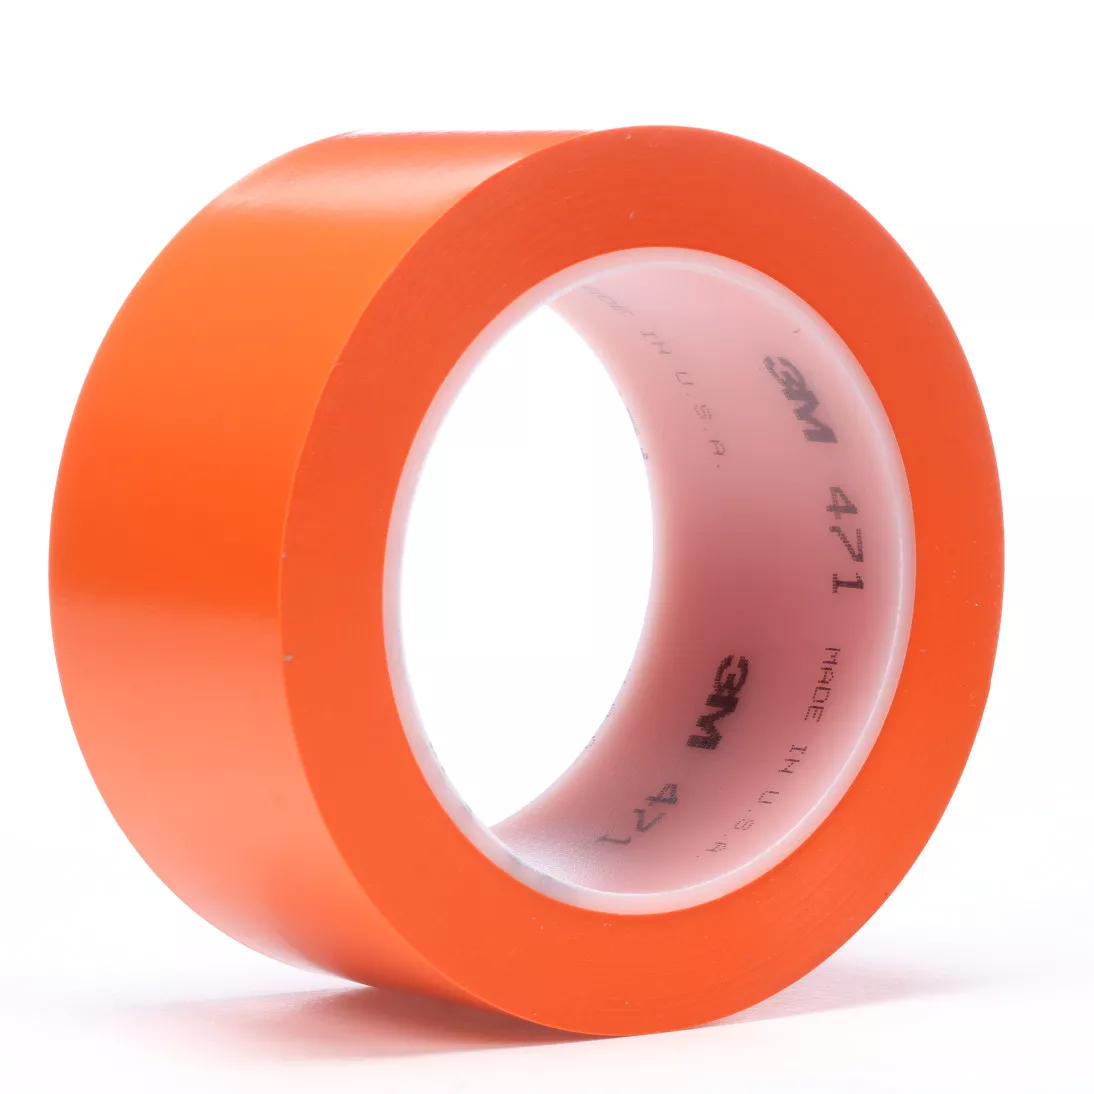 3M™ Vinyl Tape 471, Orange, 1/4 in x 36 yd, 5.2 mil, 144 rolls per case,
Individually Wrapped Conveniently Packaged